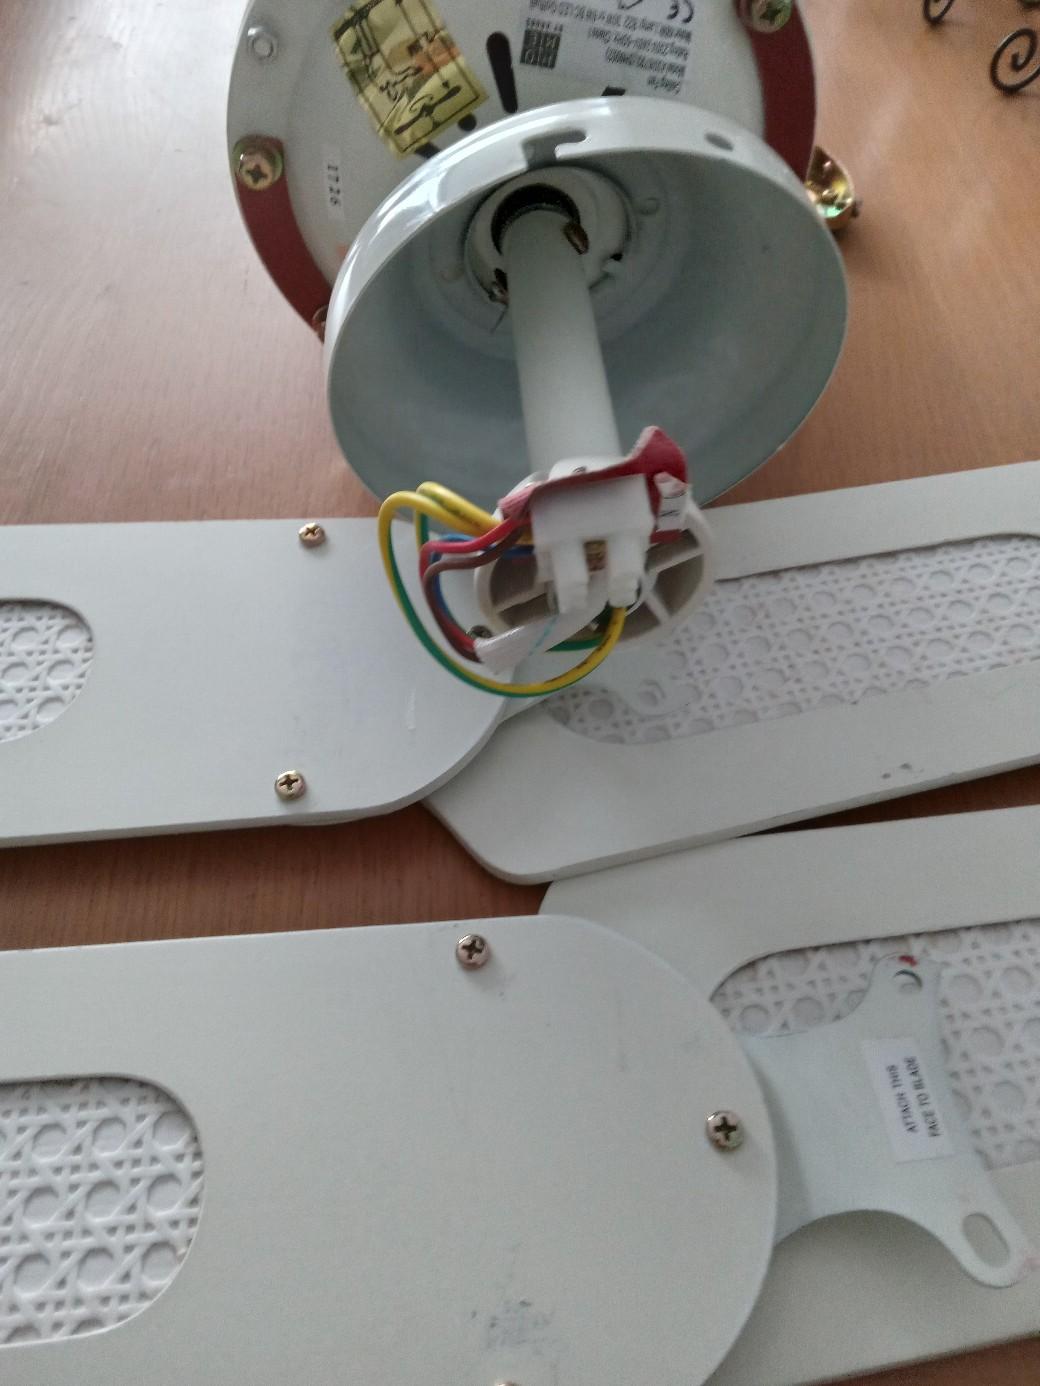 Ceiling light / fan. Complete with fittings in SS15 Basildon für 15,00 ...